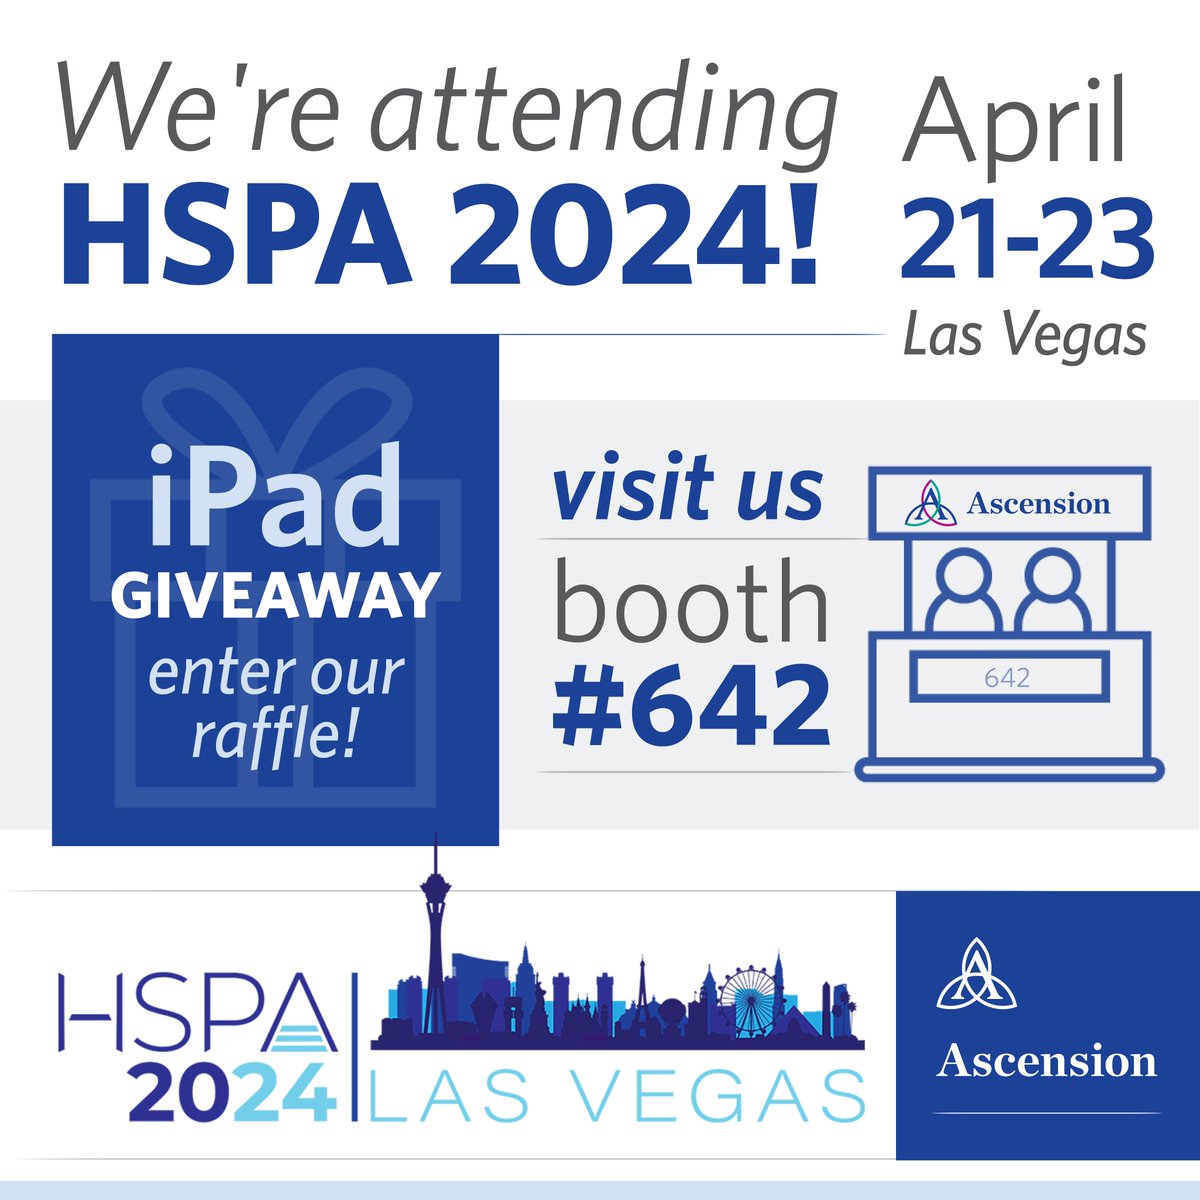 The Ascension sterile processing and recruitment teams will be at Harrah’s Las Vegas Hotel and Casino Convention Center April 21 - 23 for the HSPA annual event. We are eager to connect with and learn more from experts in the field! Learn more: ascn.io/6015b35ec #HSPA2024